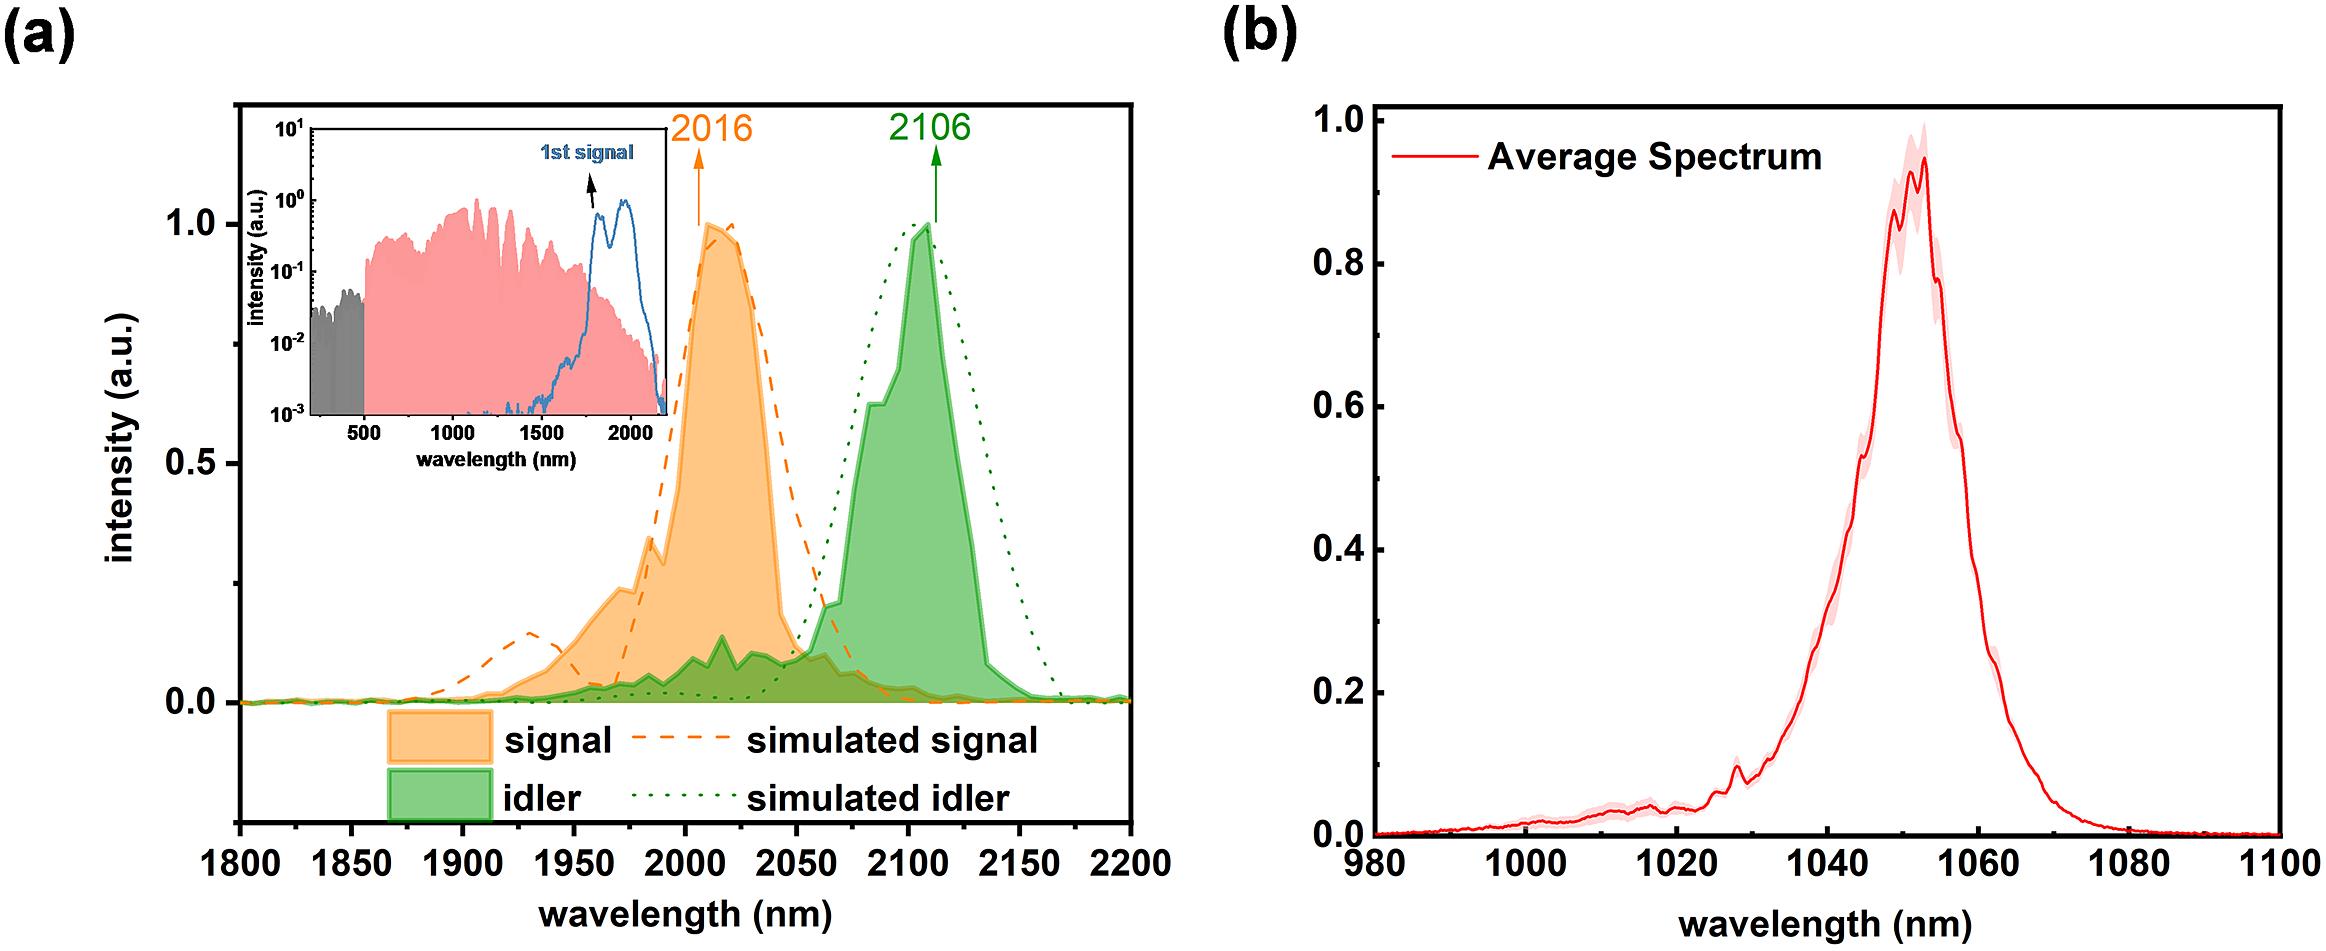 (a) Spectra of NOPA2 output. The orange area is the amplified signal pulse and the green area is the idler pulse of NOPA2. The orange dashed line (simulated signal) and green dotted line (simulated idler) are the simulated spectra. The red area of the inset is the spectrum of the white light generated by YAG, and the jitter before 500 nm (gray area) may be caused by stray light of the spectrometer. The blue line of the inset is the amplified signal pulse of NOPA1. (b) Spectra of second-harmonic generation of the idler from NOPA2. The spectra fluctuate in the red area, and the middle solid line is the average value.